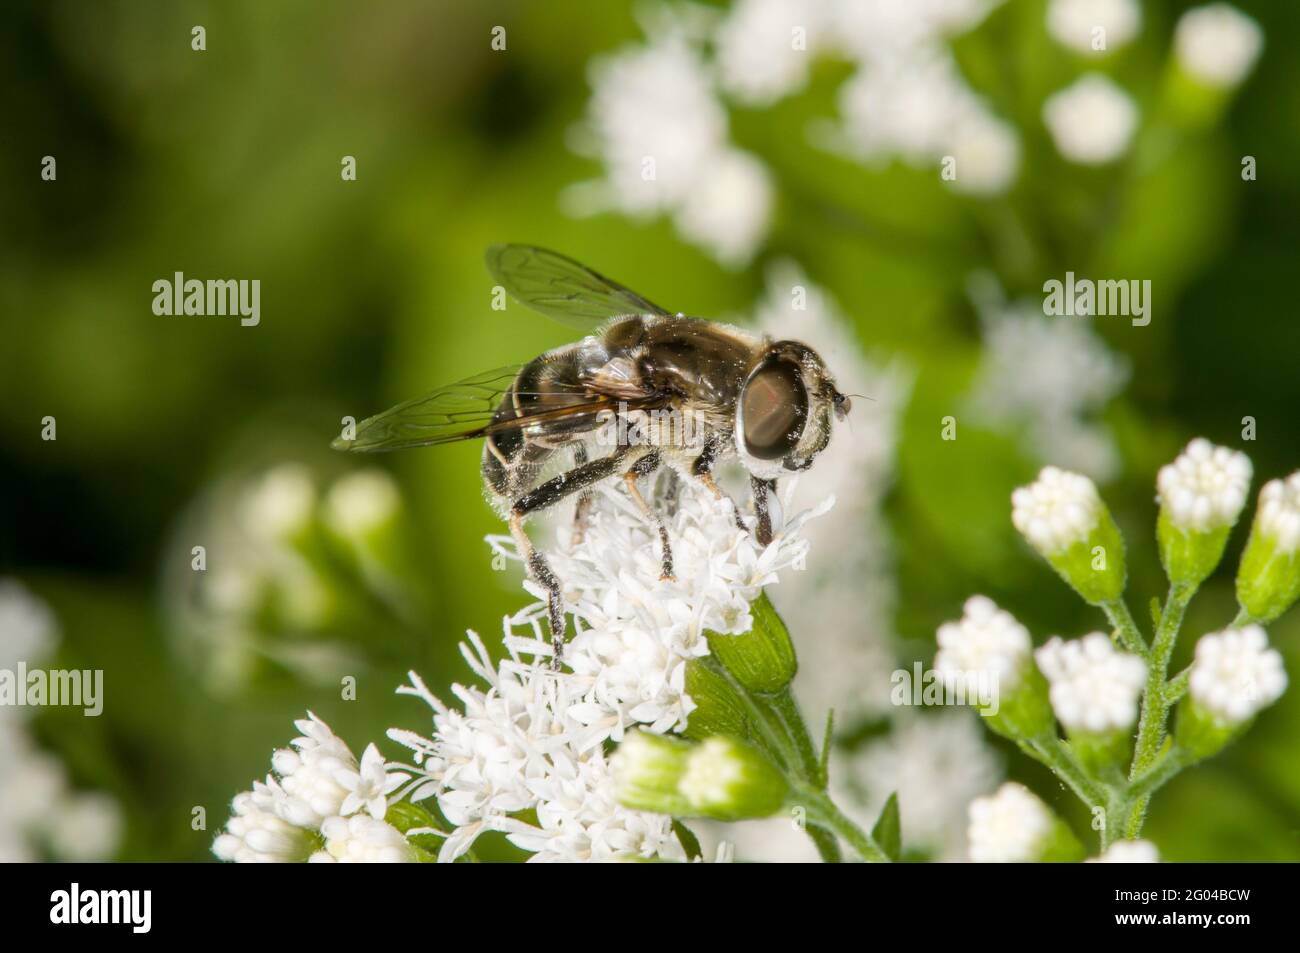 Vadnais Heights, Minnesota. John H. Allison forest. Side view of a Black-shouldered Drone Fly, Eristalis dimidiata covered in pollen while feeding on Stock Photo